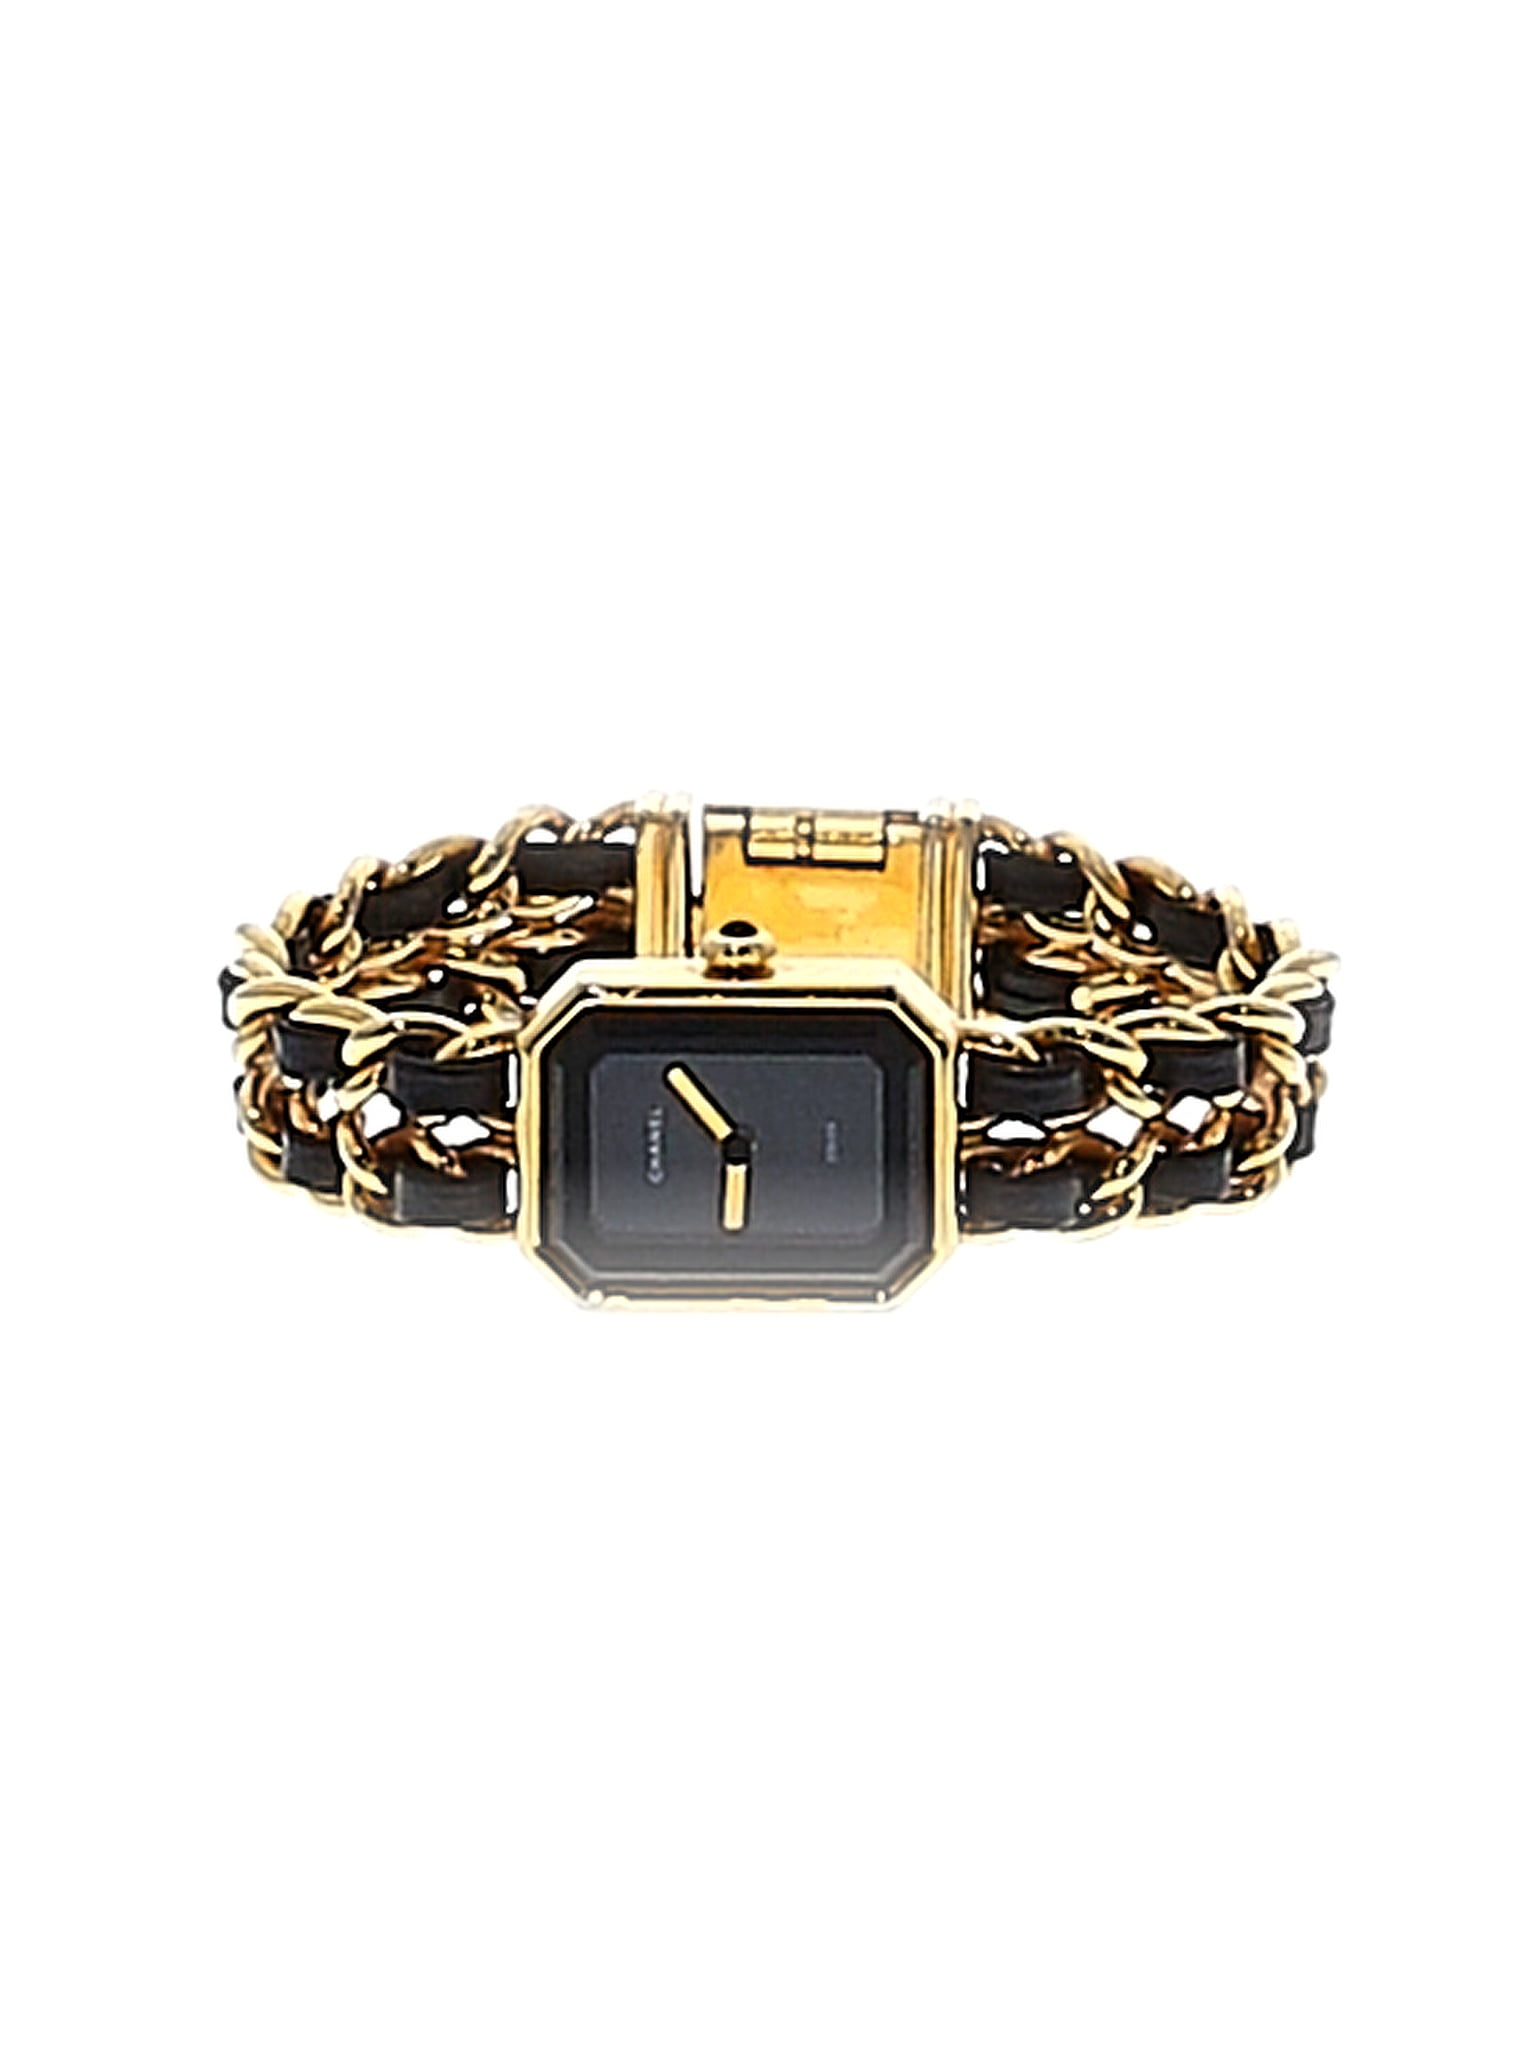 Sell Chanel Watch  Sell your Chanel Watch online